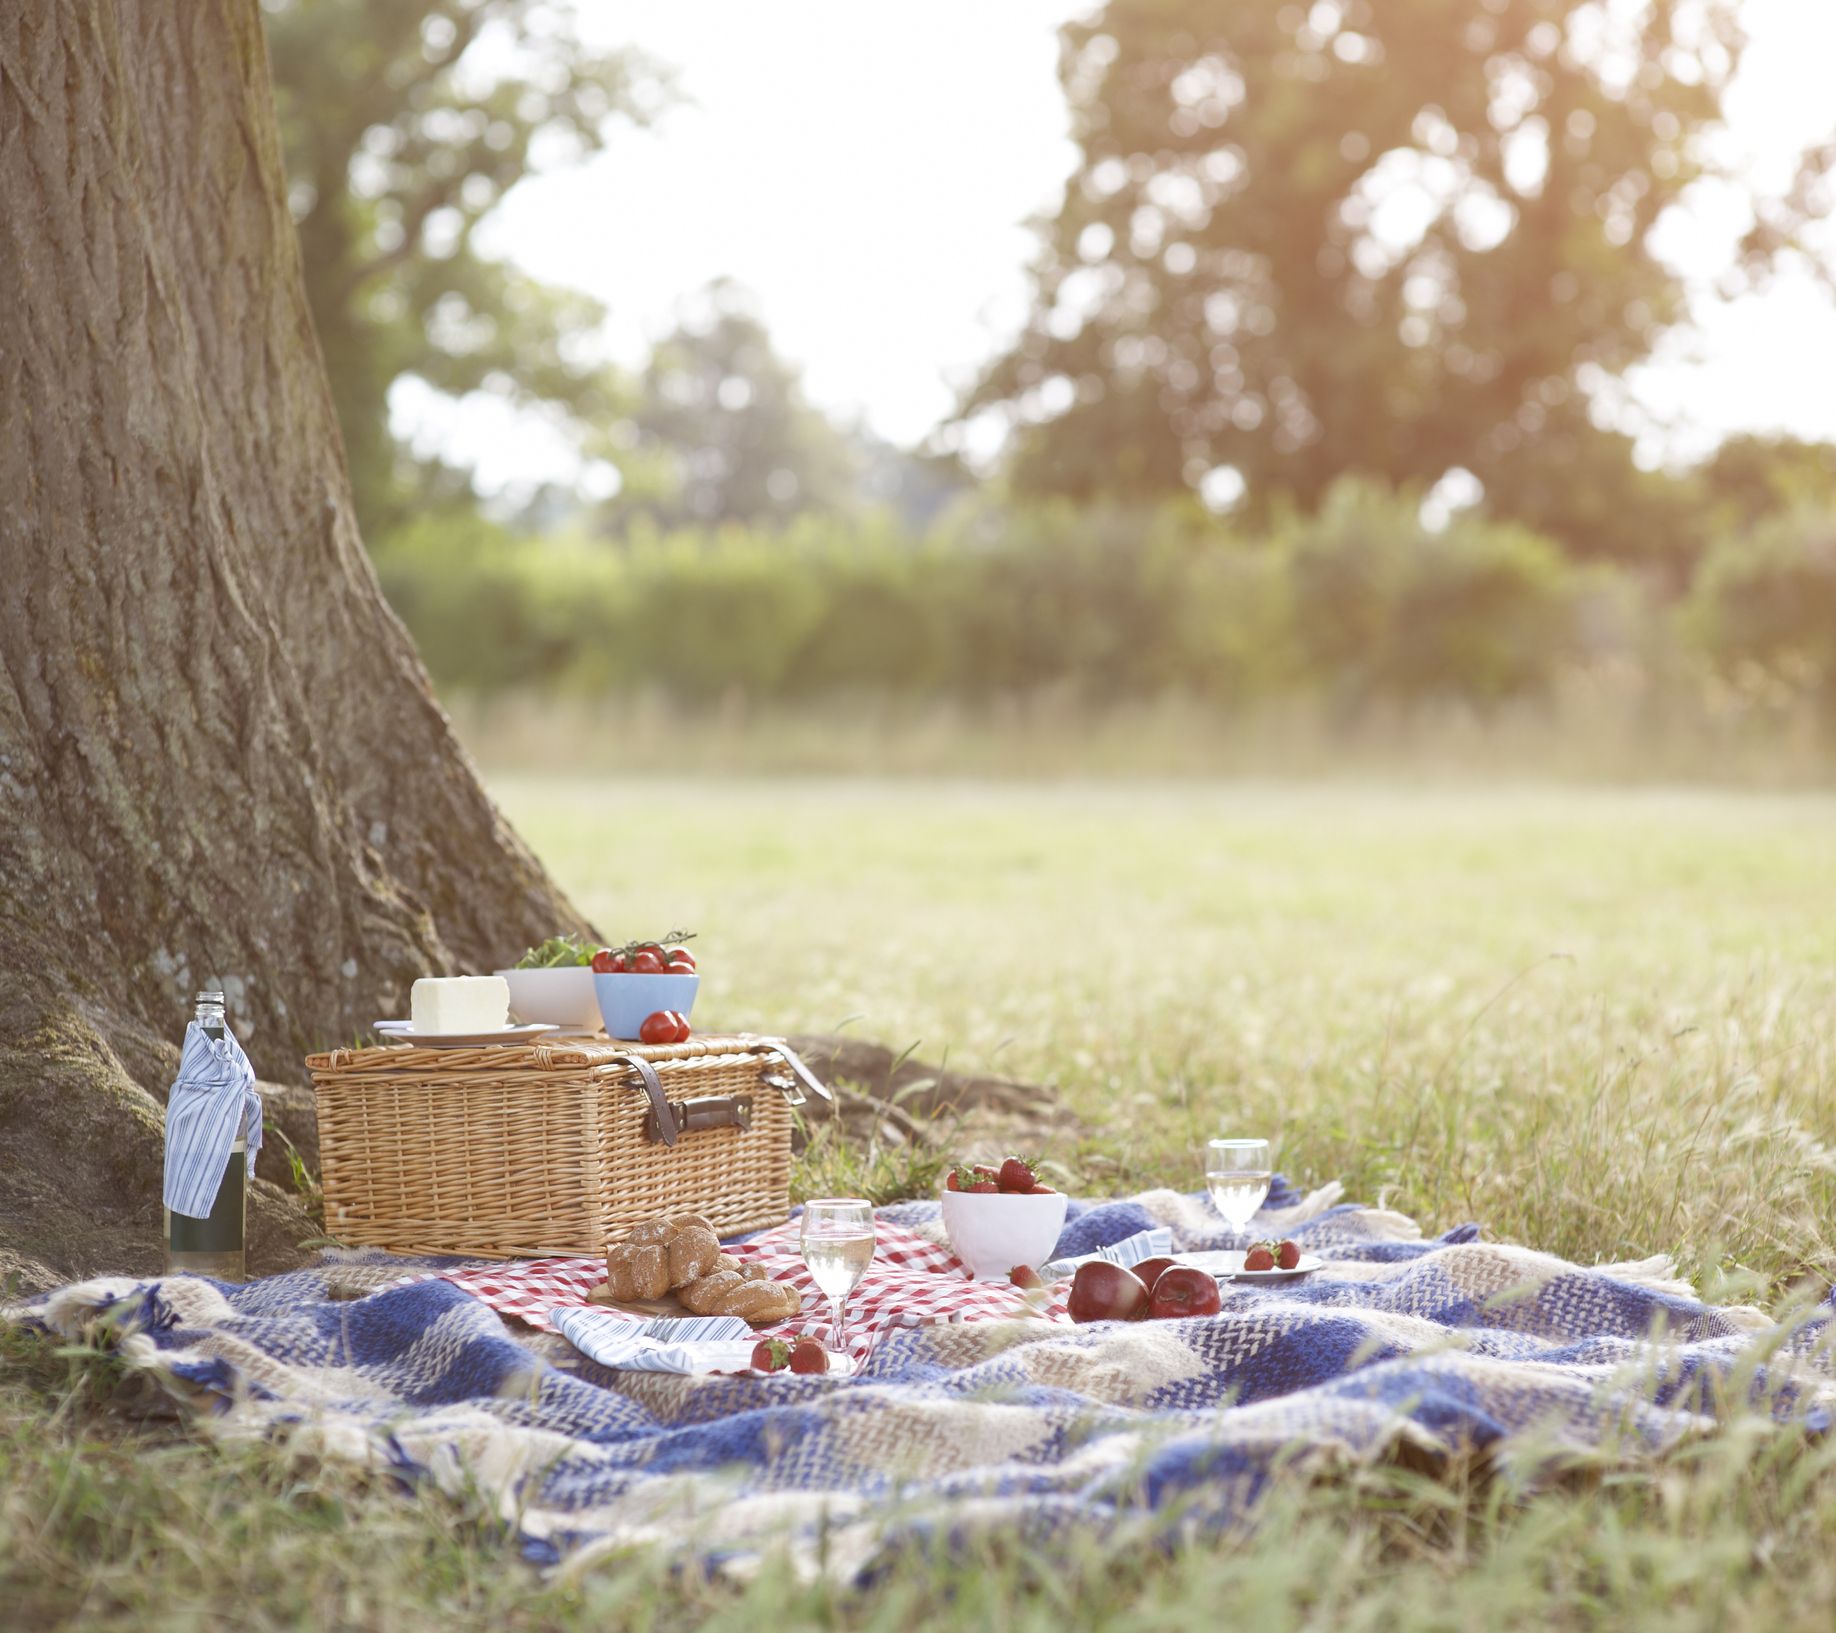 Large Fold Away Picnic Blanket Ideal For The Outdoor Countryside And Beaches